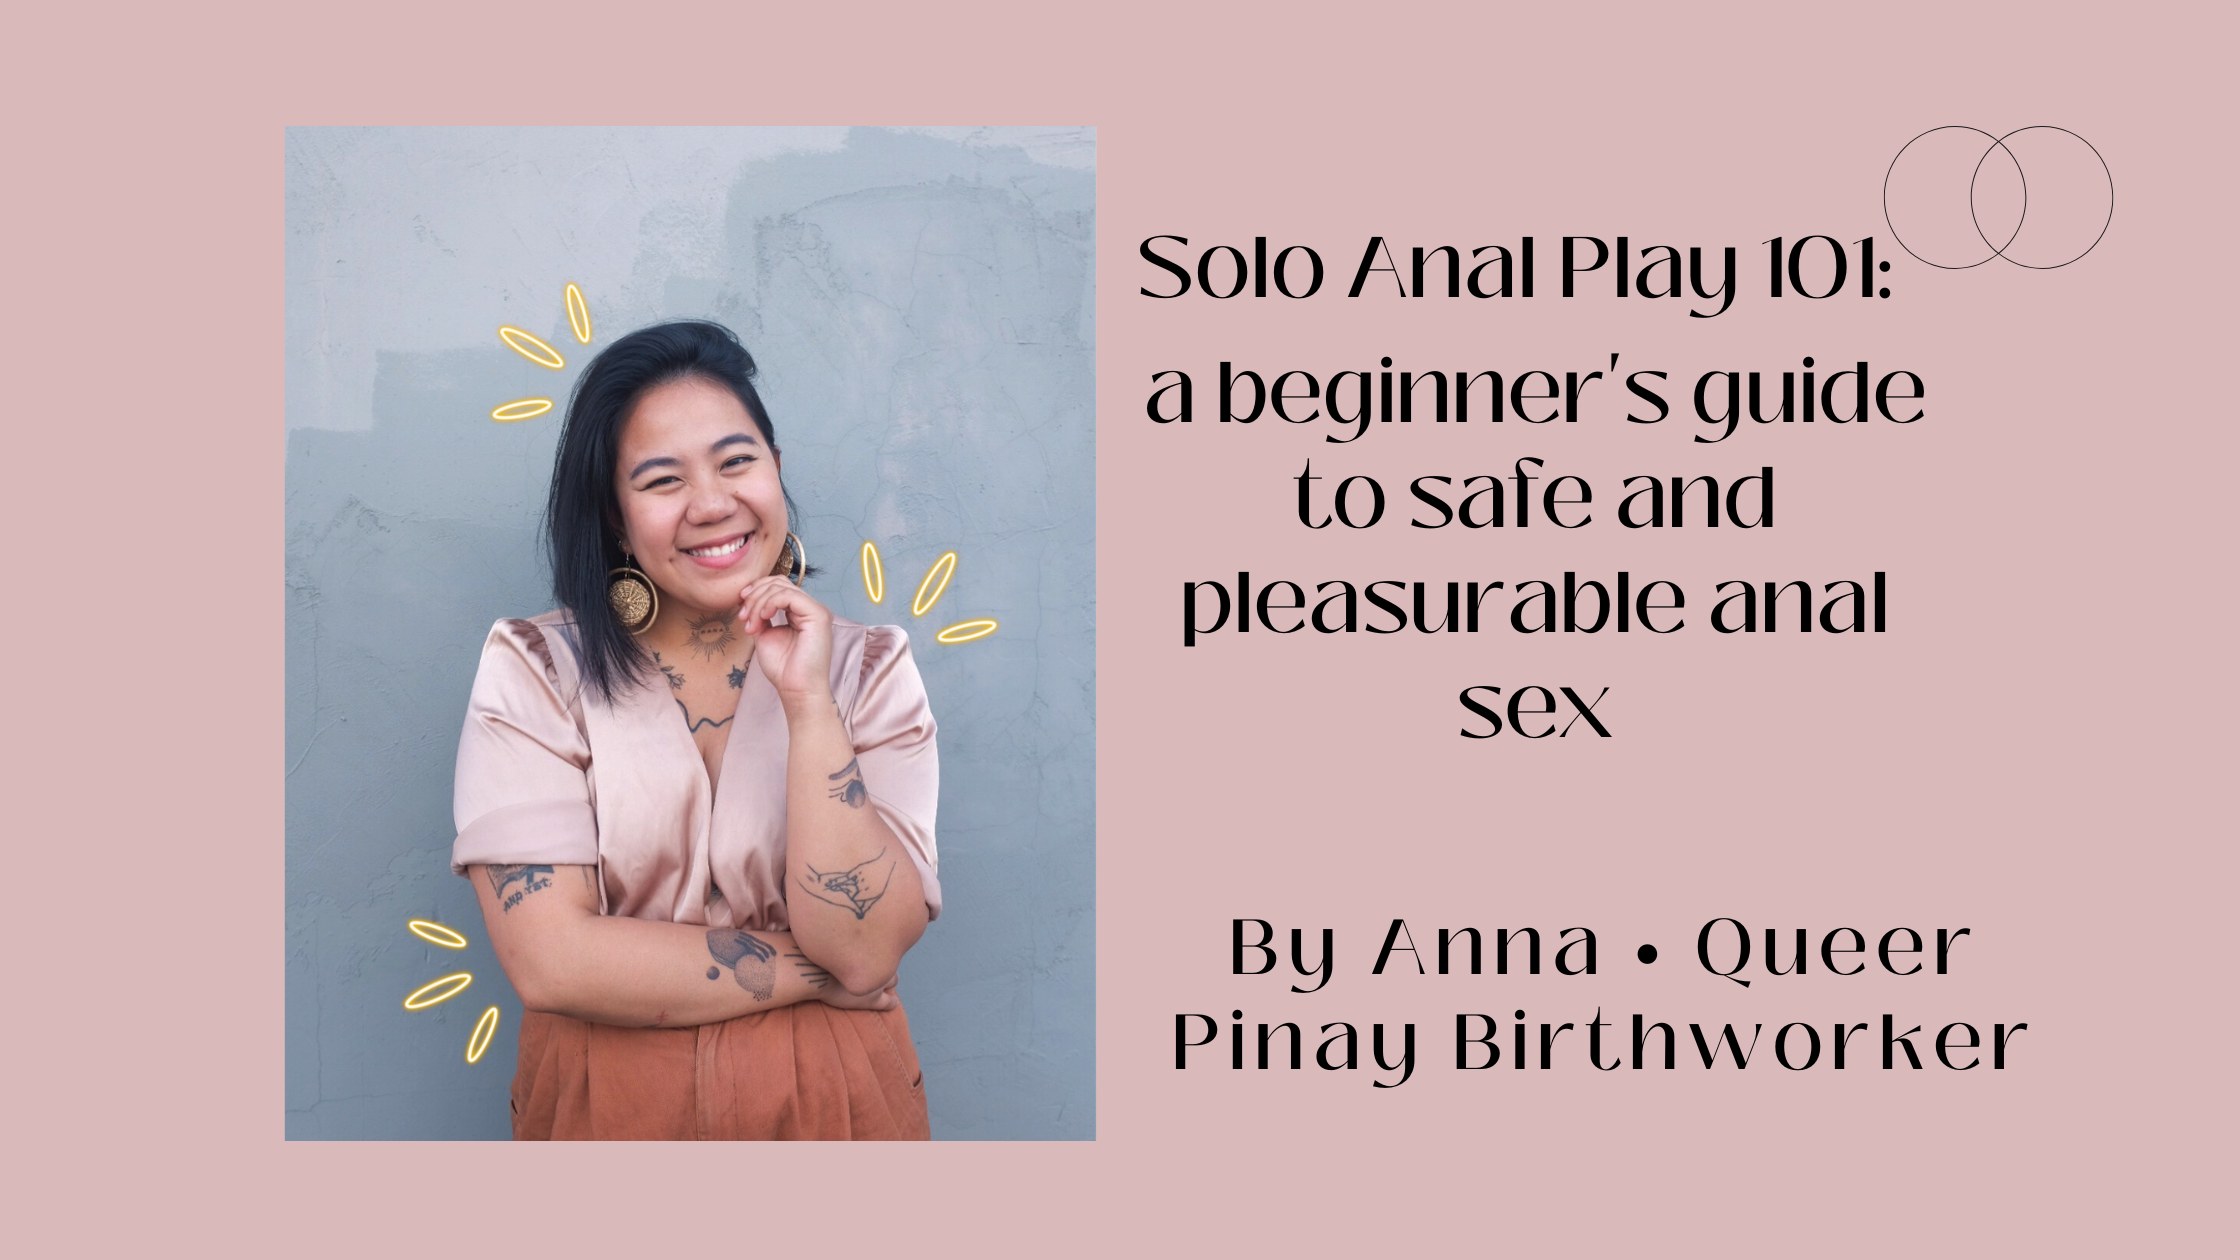 Solo Anal Play 101: A Beginner's Guide to Safe and Pleasurable Anal Sex